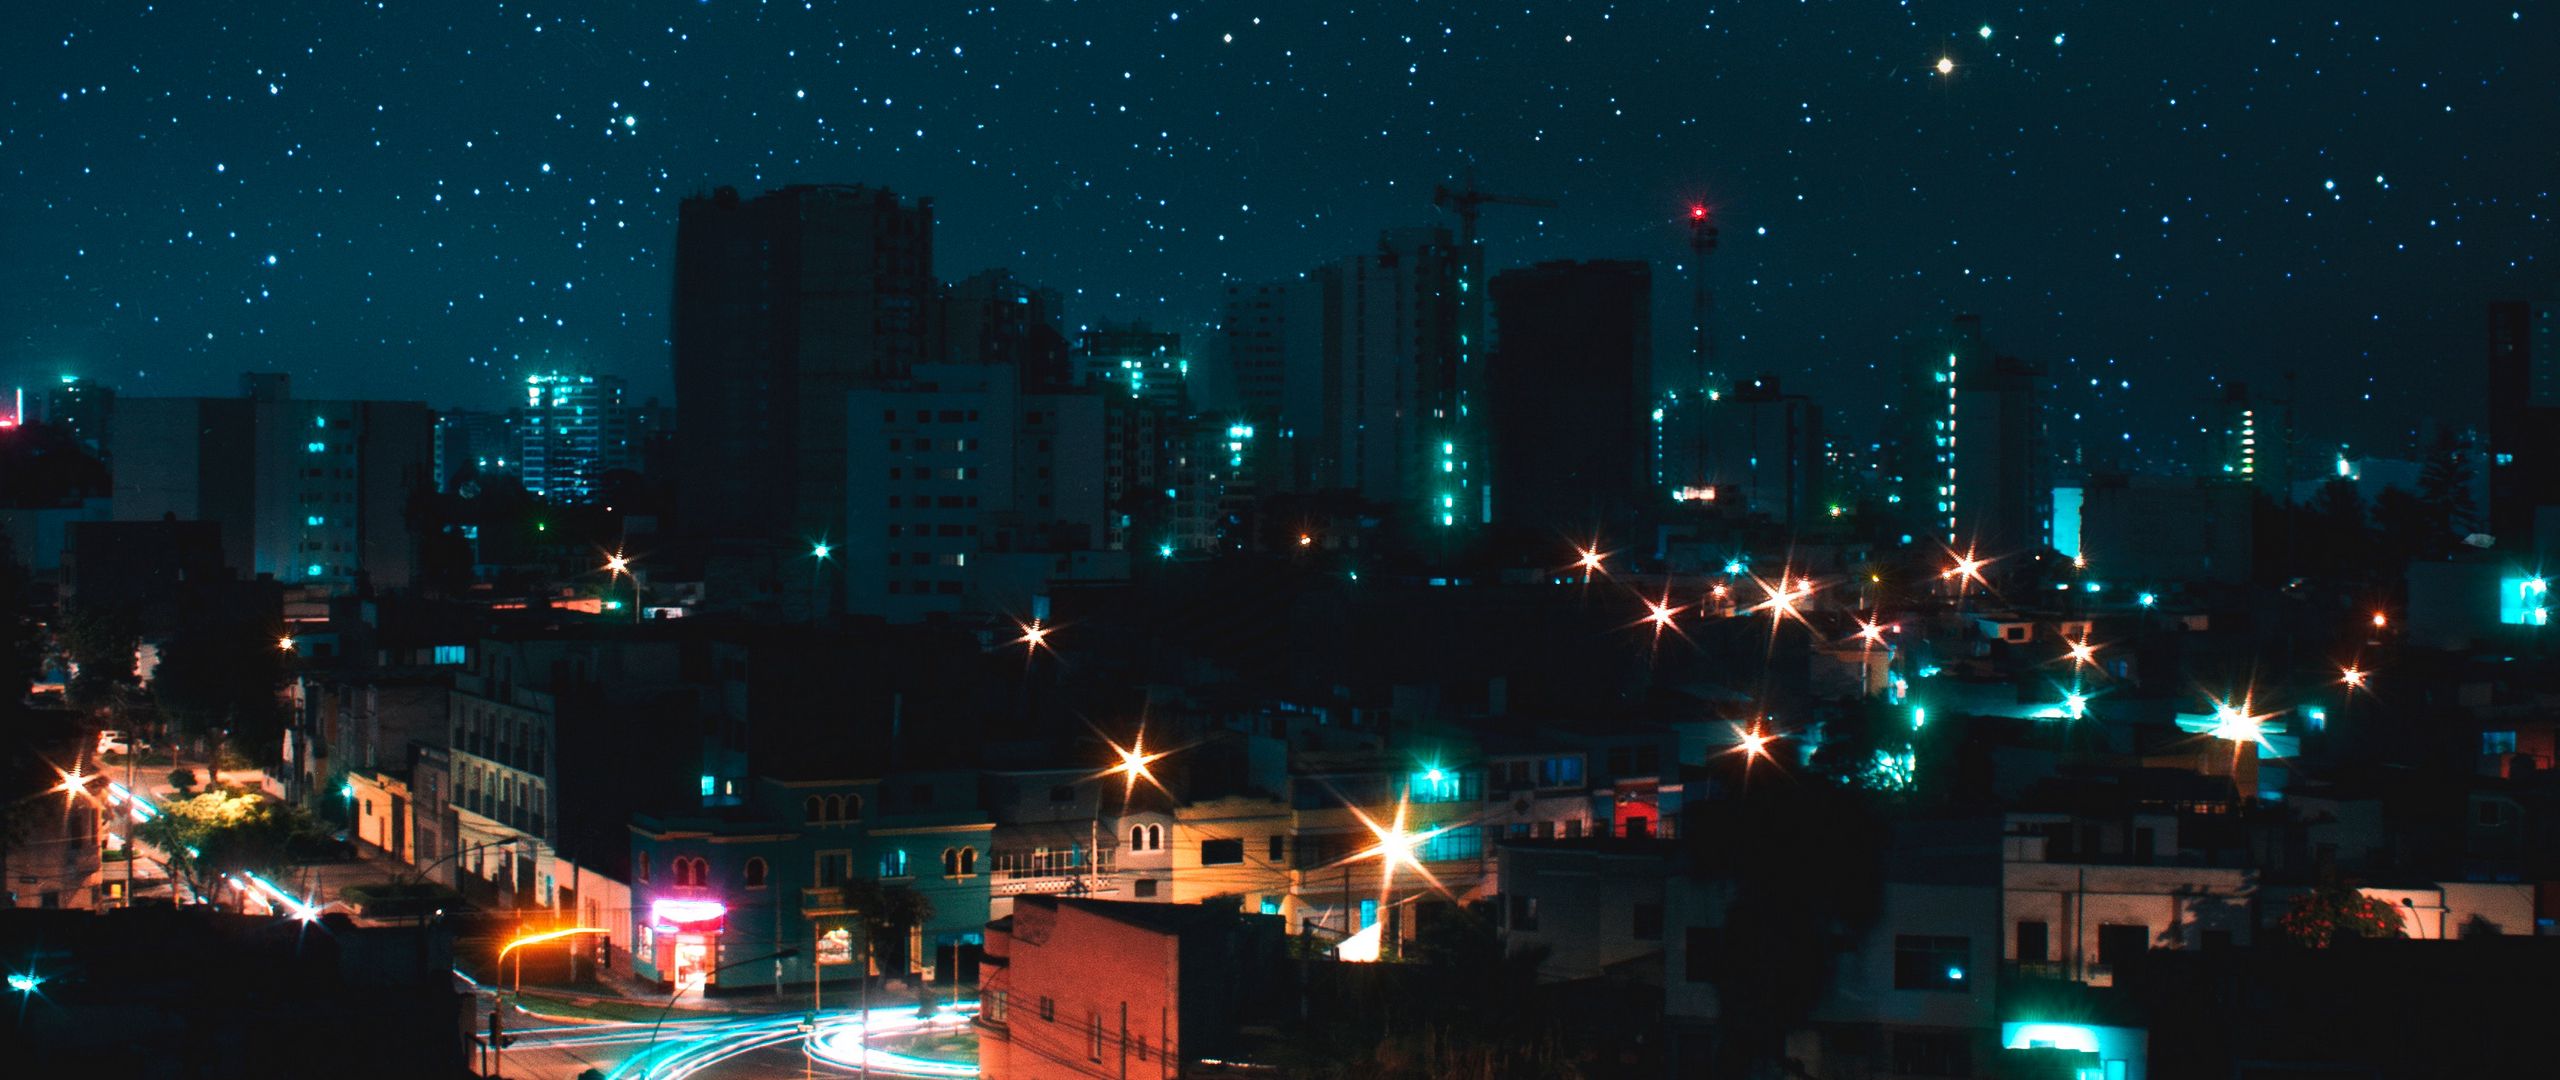 Download wallpaper 2560x1080 night city, view from above, starry sky, buildings dual wide 1080p HD background